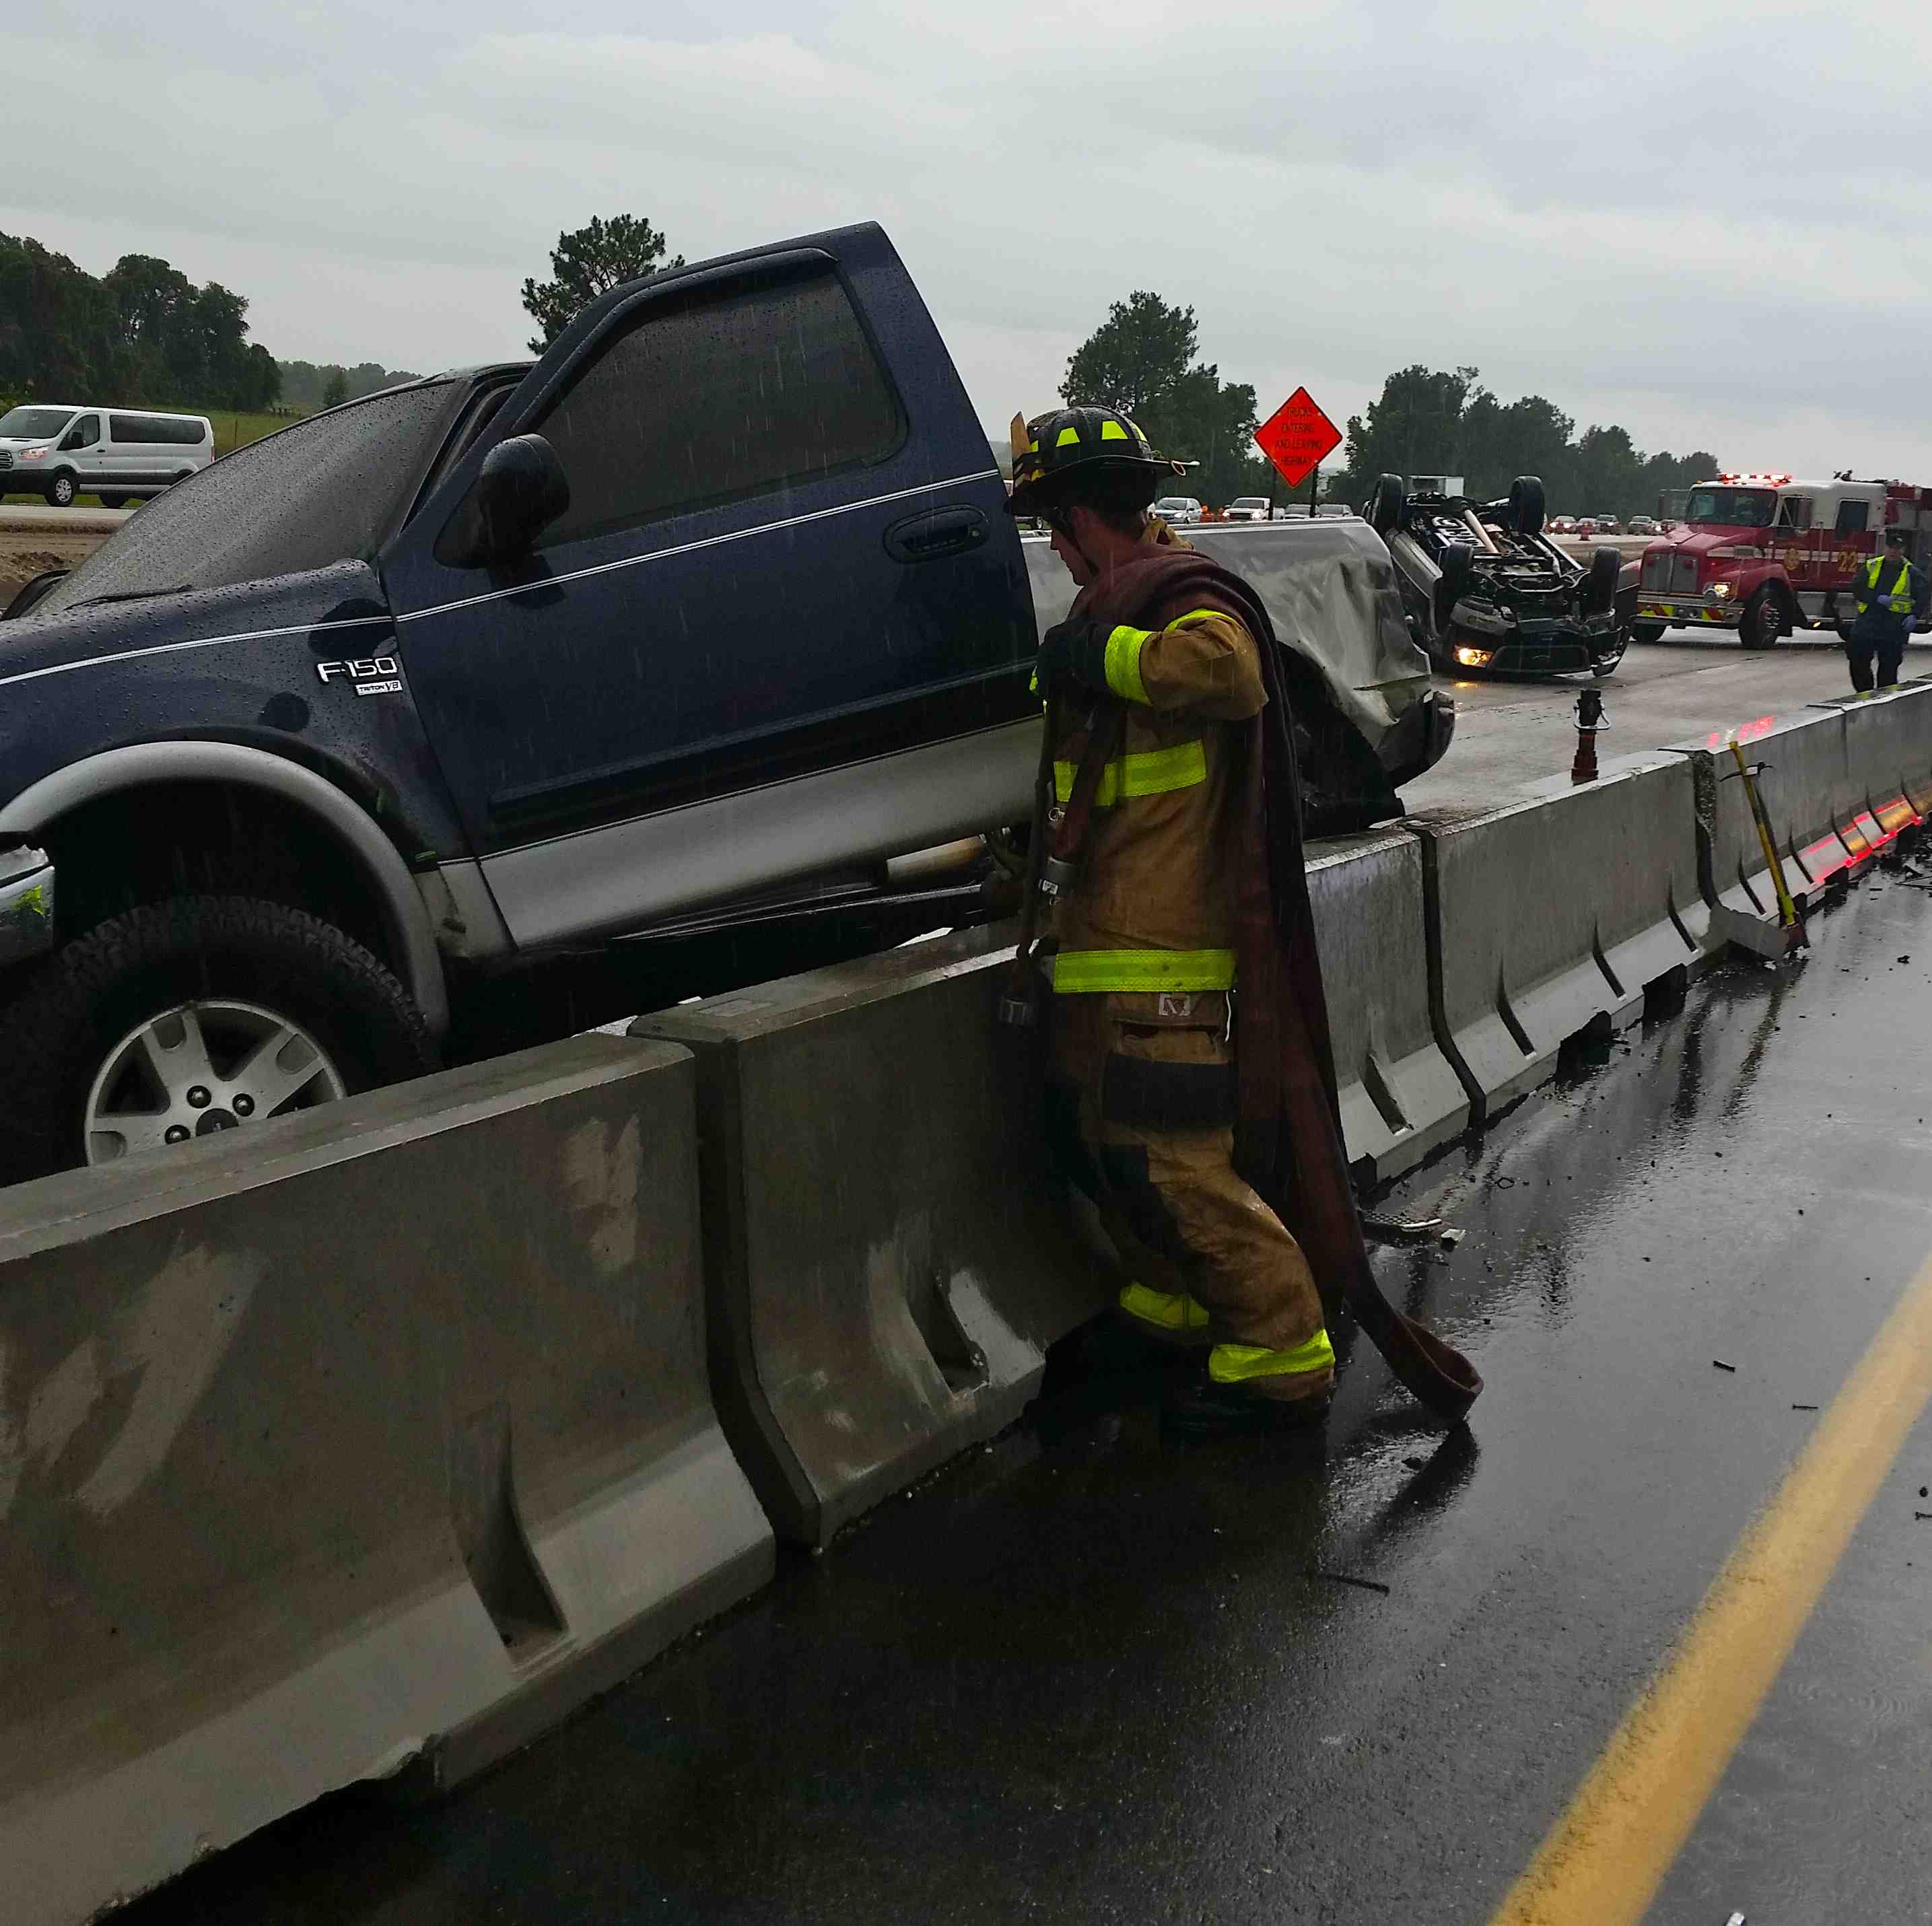 Firefighters battle fire after threevehicle crash on Interstate 75